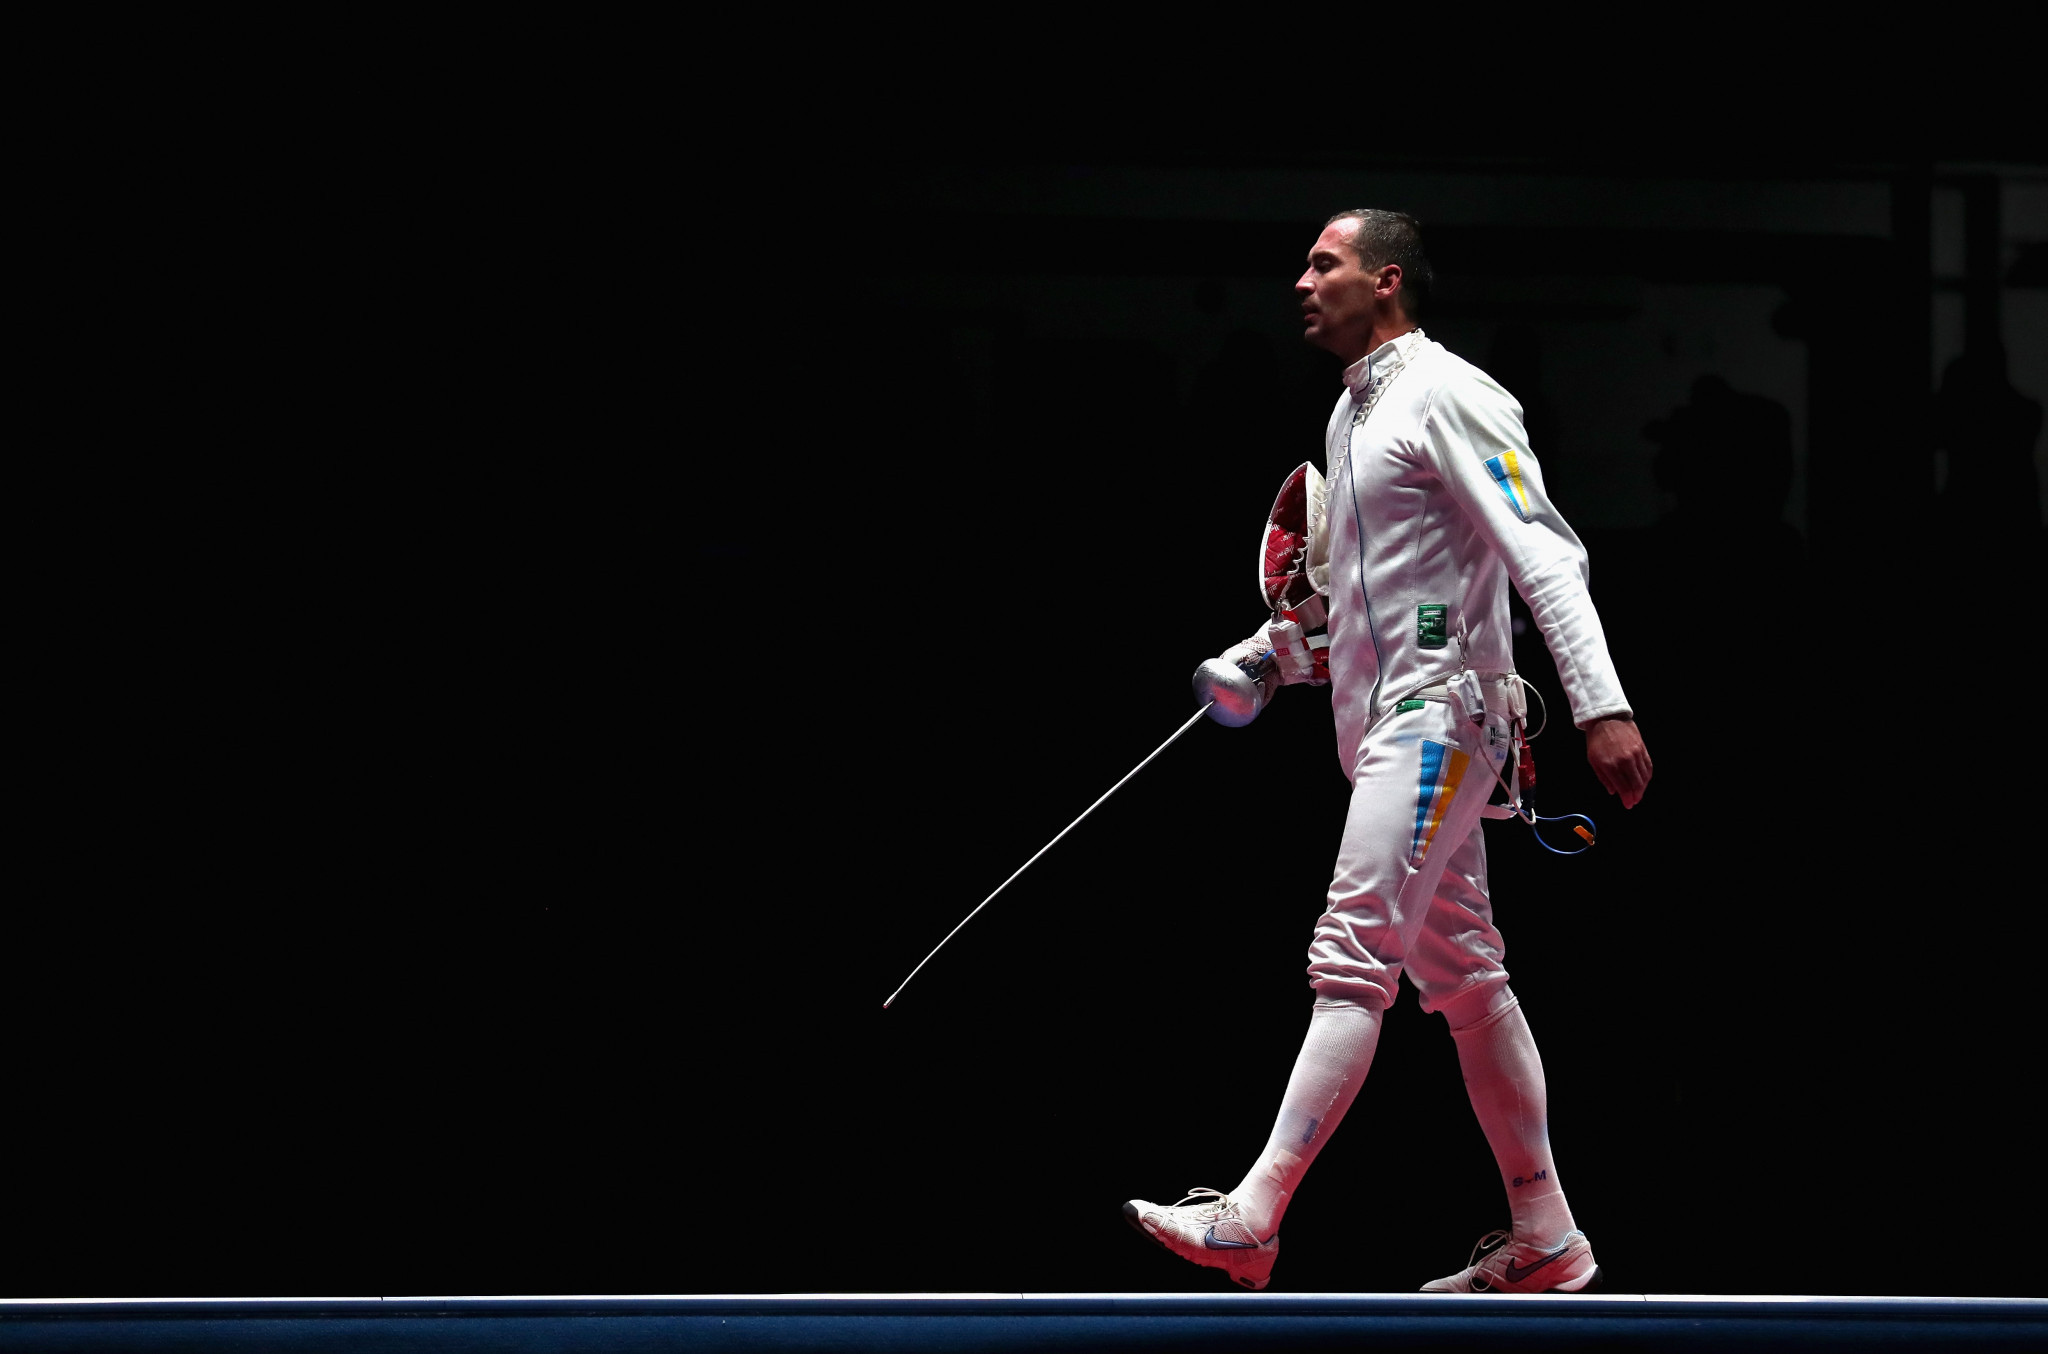 Ukraine's Bogdan Nikishin will be among the leading contenders at the FIE Men's Épée World Cup in Buenos Aires, one of four events due to begin tomorrow across three continents ©Getty Images